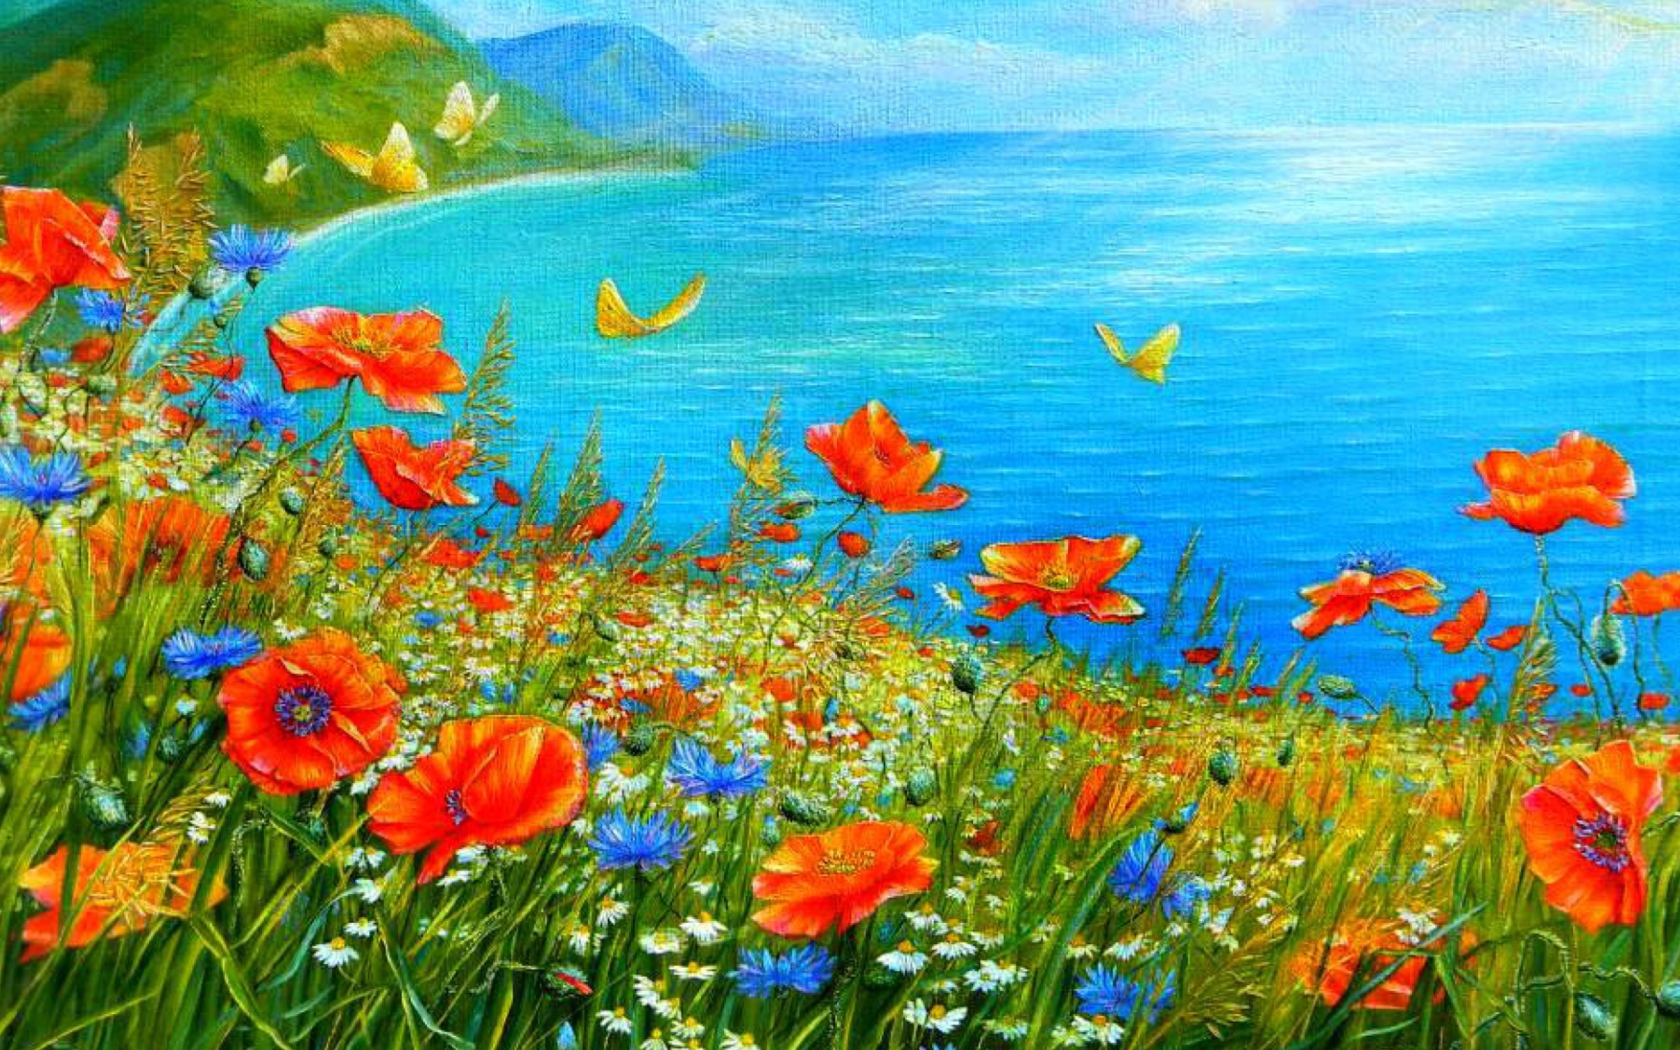 Das Summer Meadow By Sea Painting Wallpaper 1680x1050